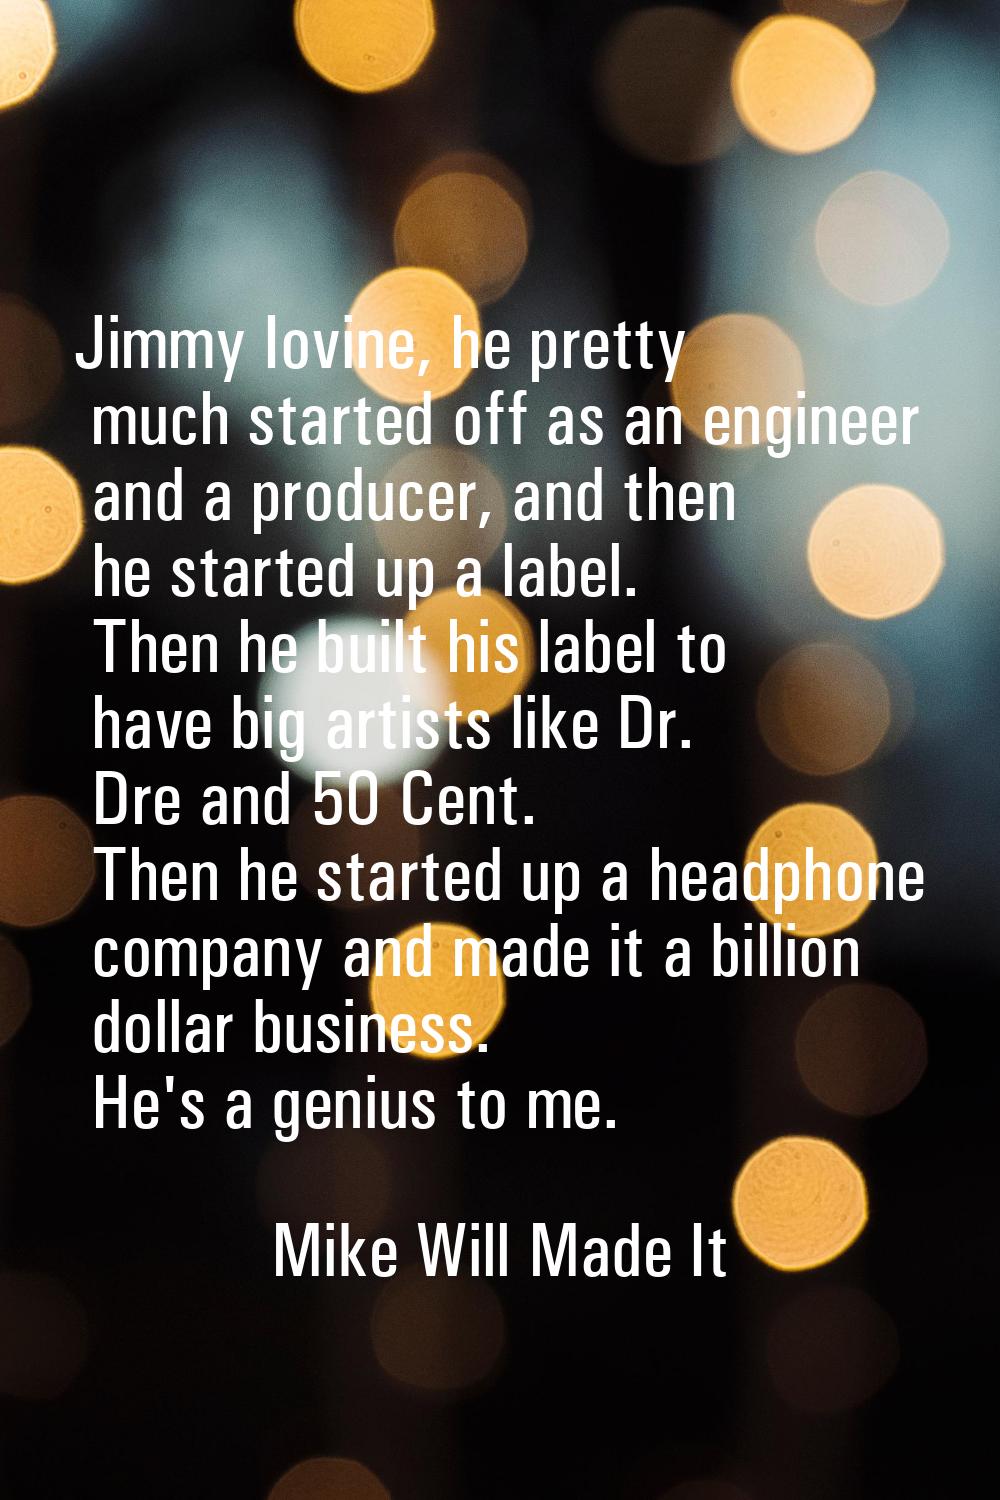 Jimmy Iovine, he pretty much started off as an engineer and a producer, and then he started up a la